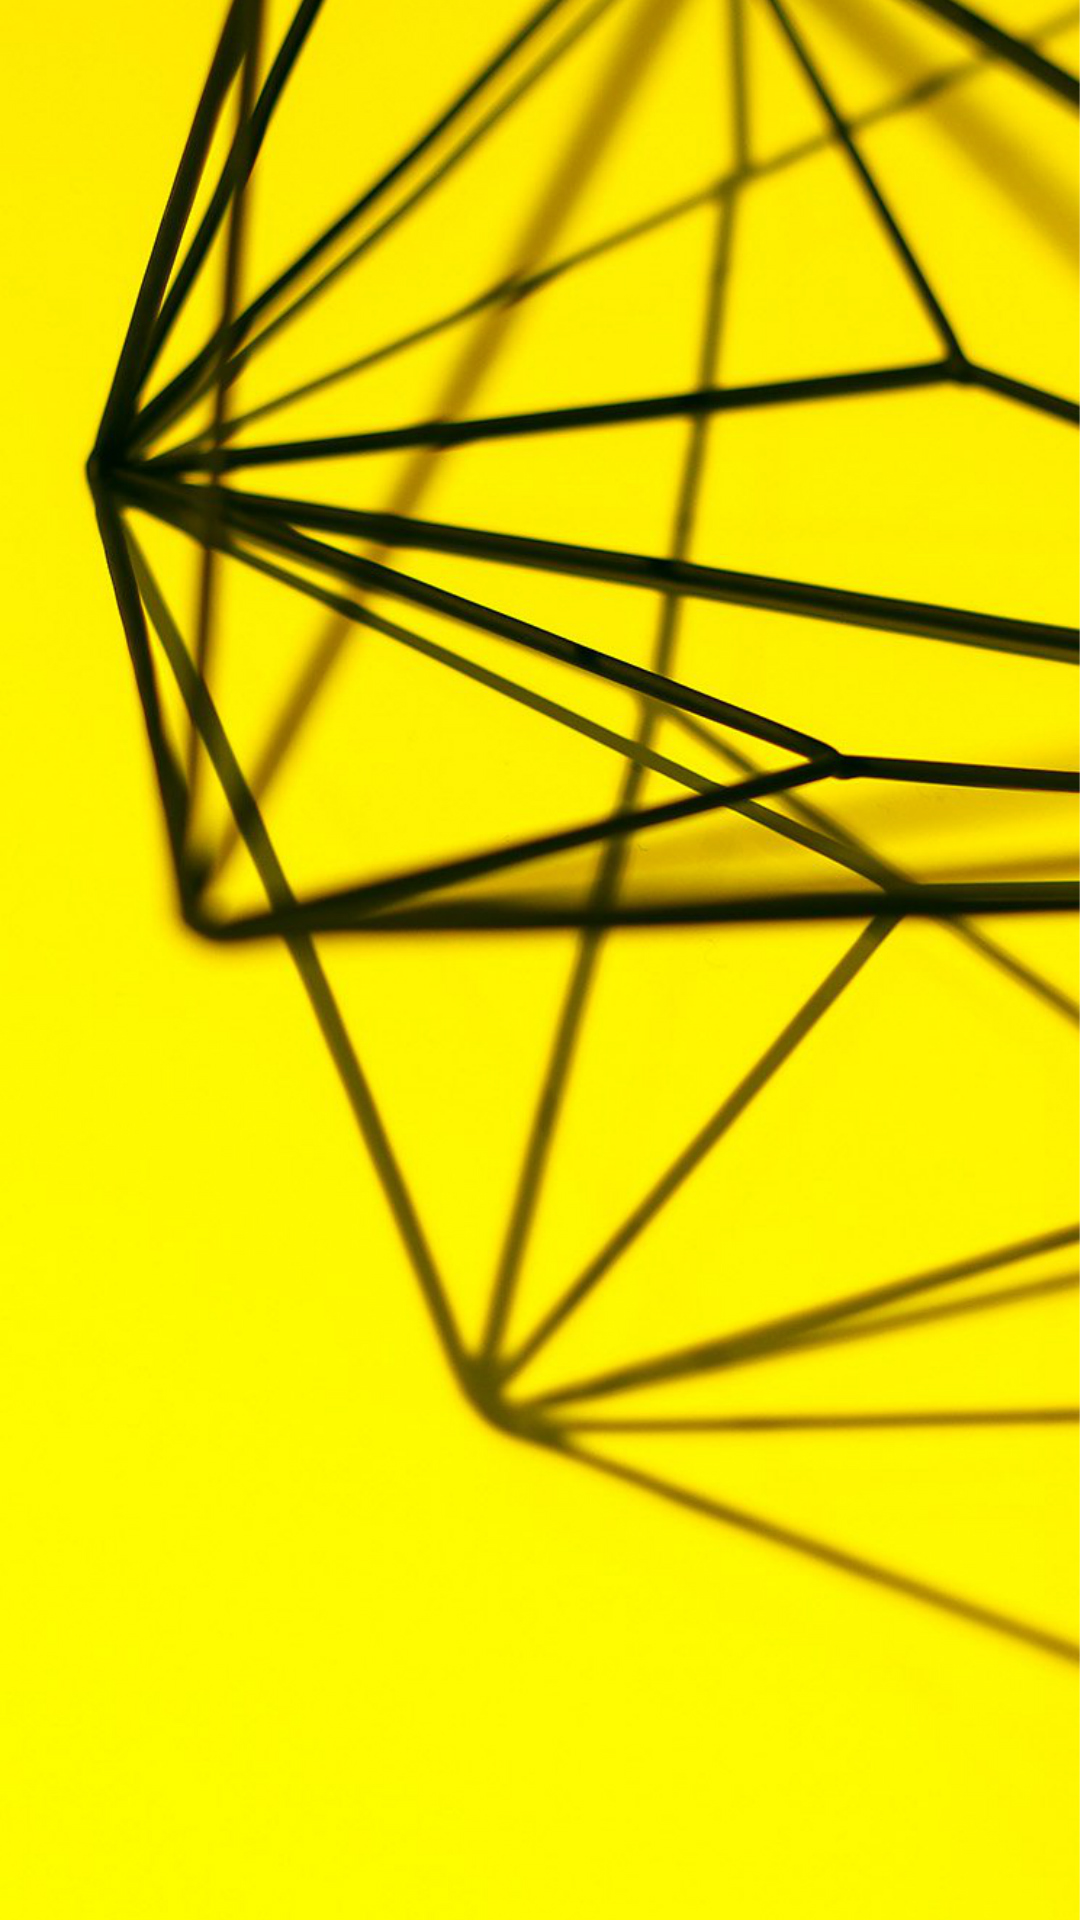 Simple Design Deco Yellow Pattern Iphonewallpaper Download - D Andre To Before Original Mix - HD Wallpaper 